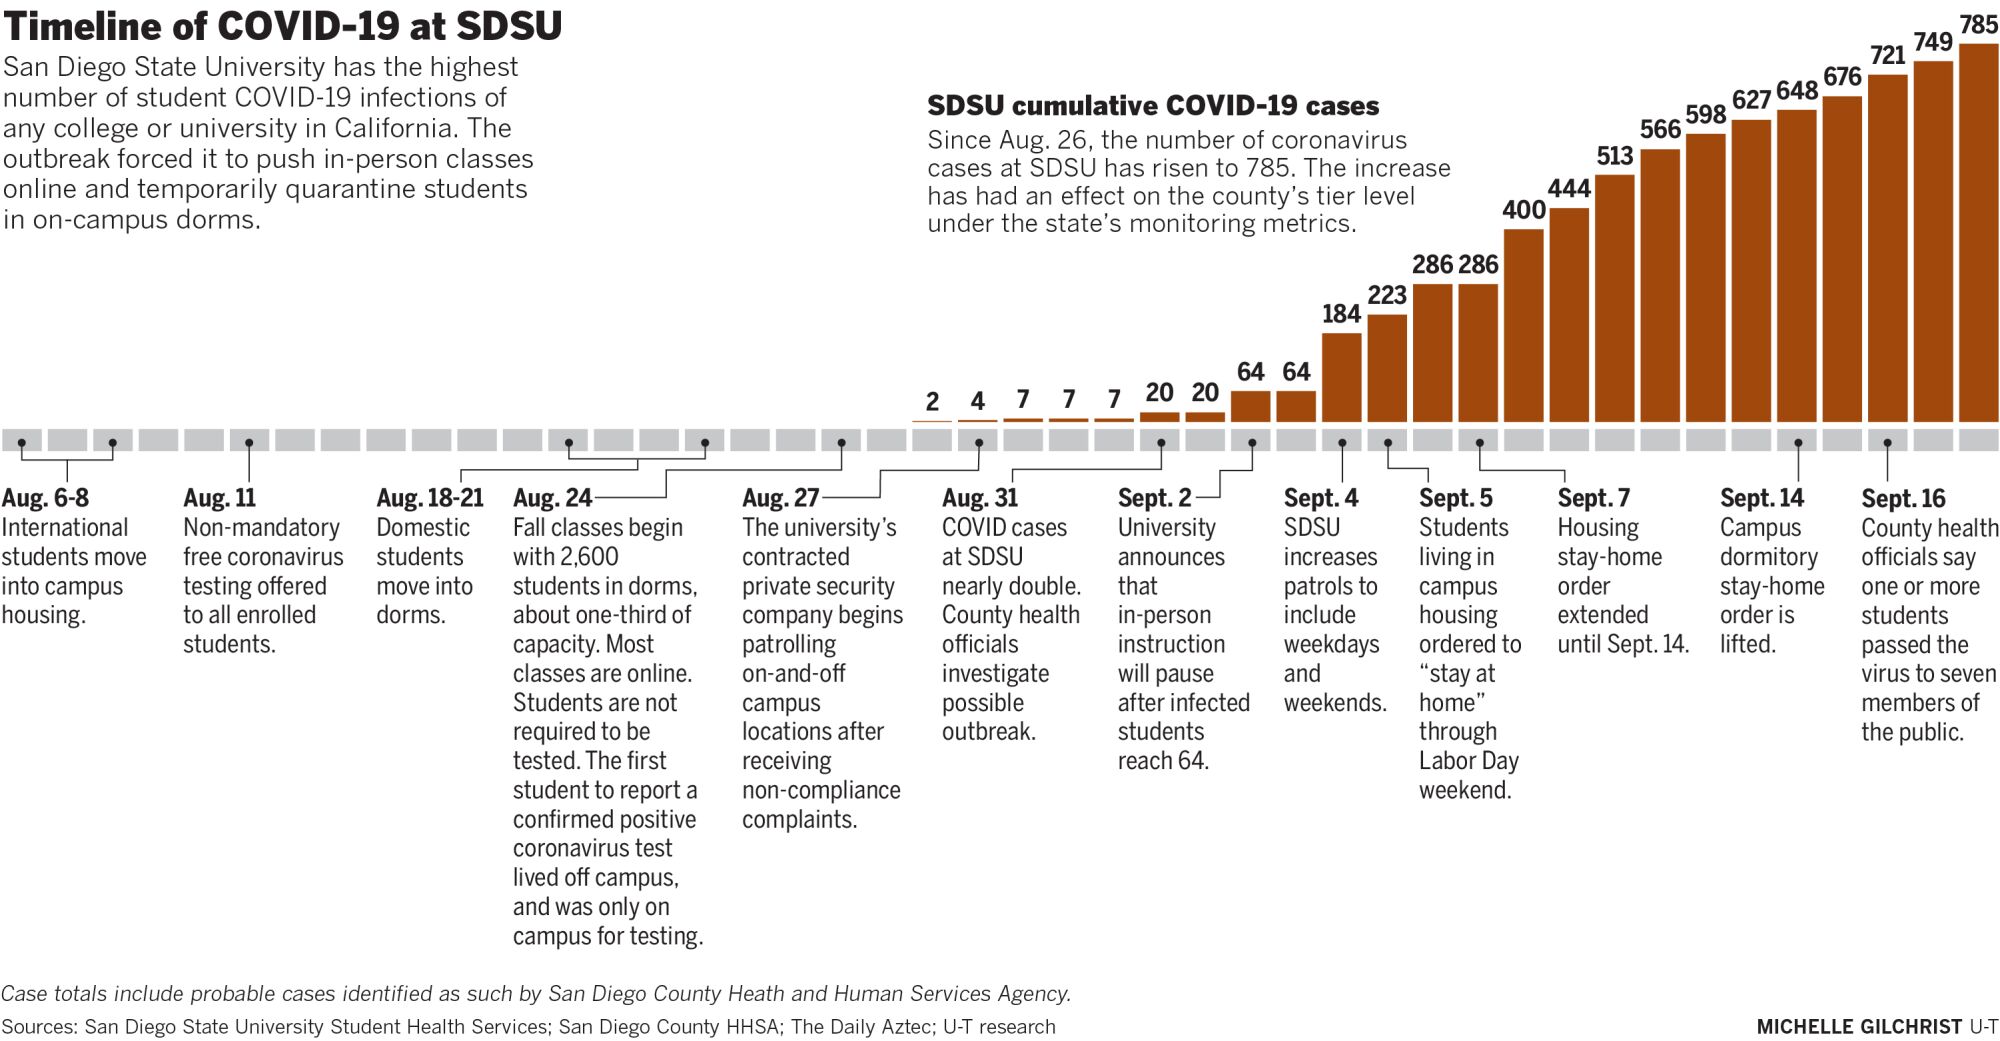 Timeline of COVID-19 cases at SDSU